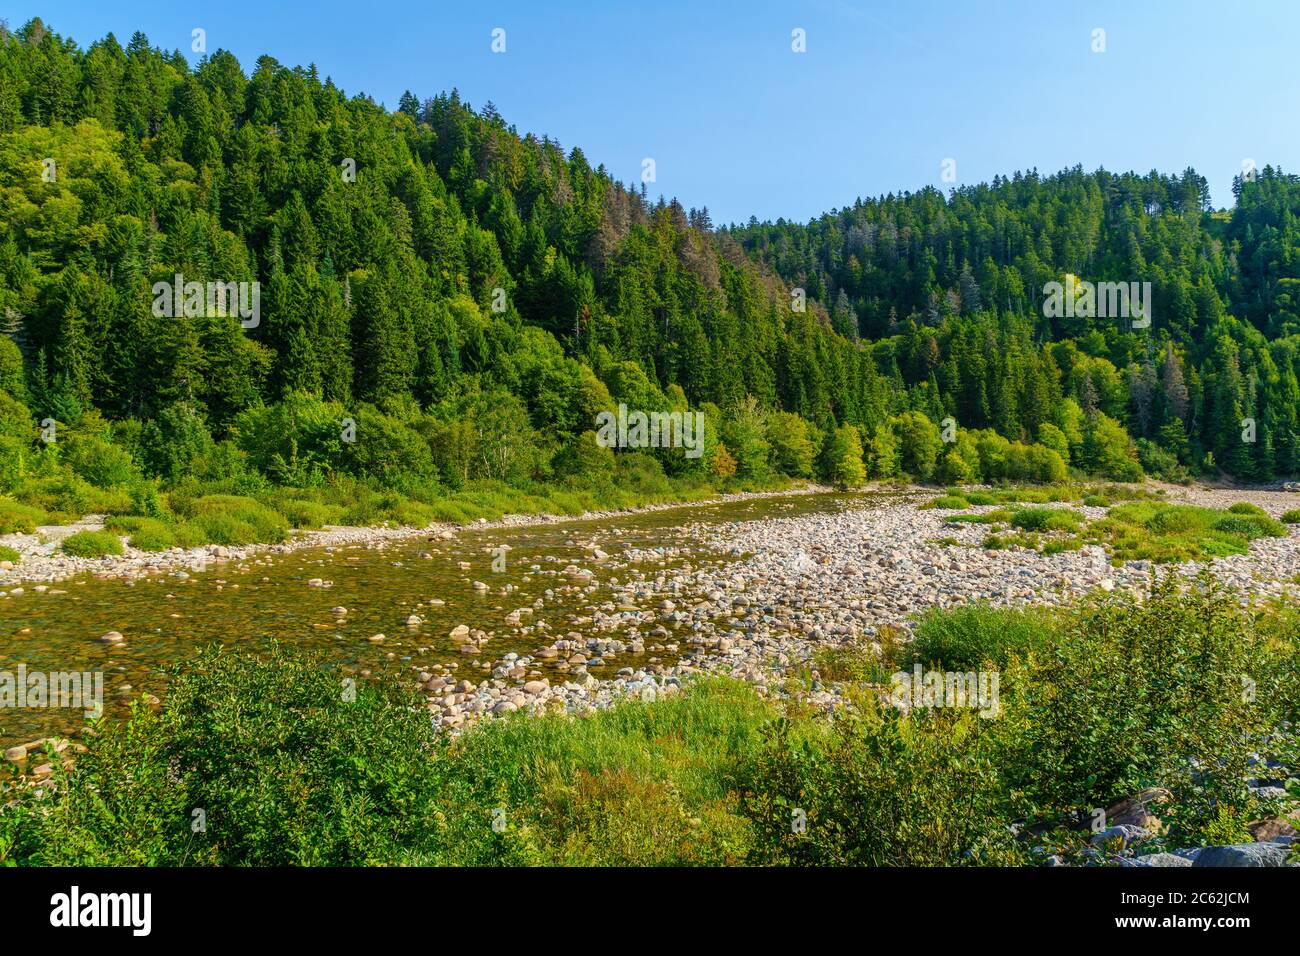 View of the Big Salmon River, in Fundy Trail Parkway park, New Brunswick, Canada Stock Photo